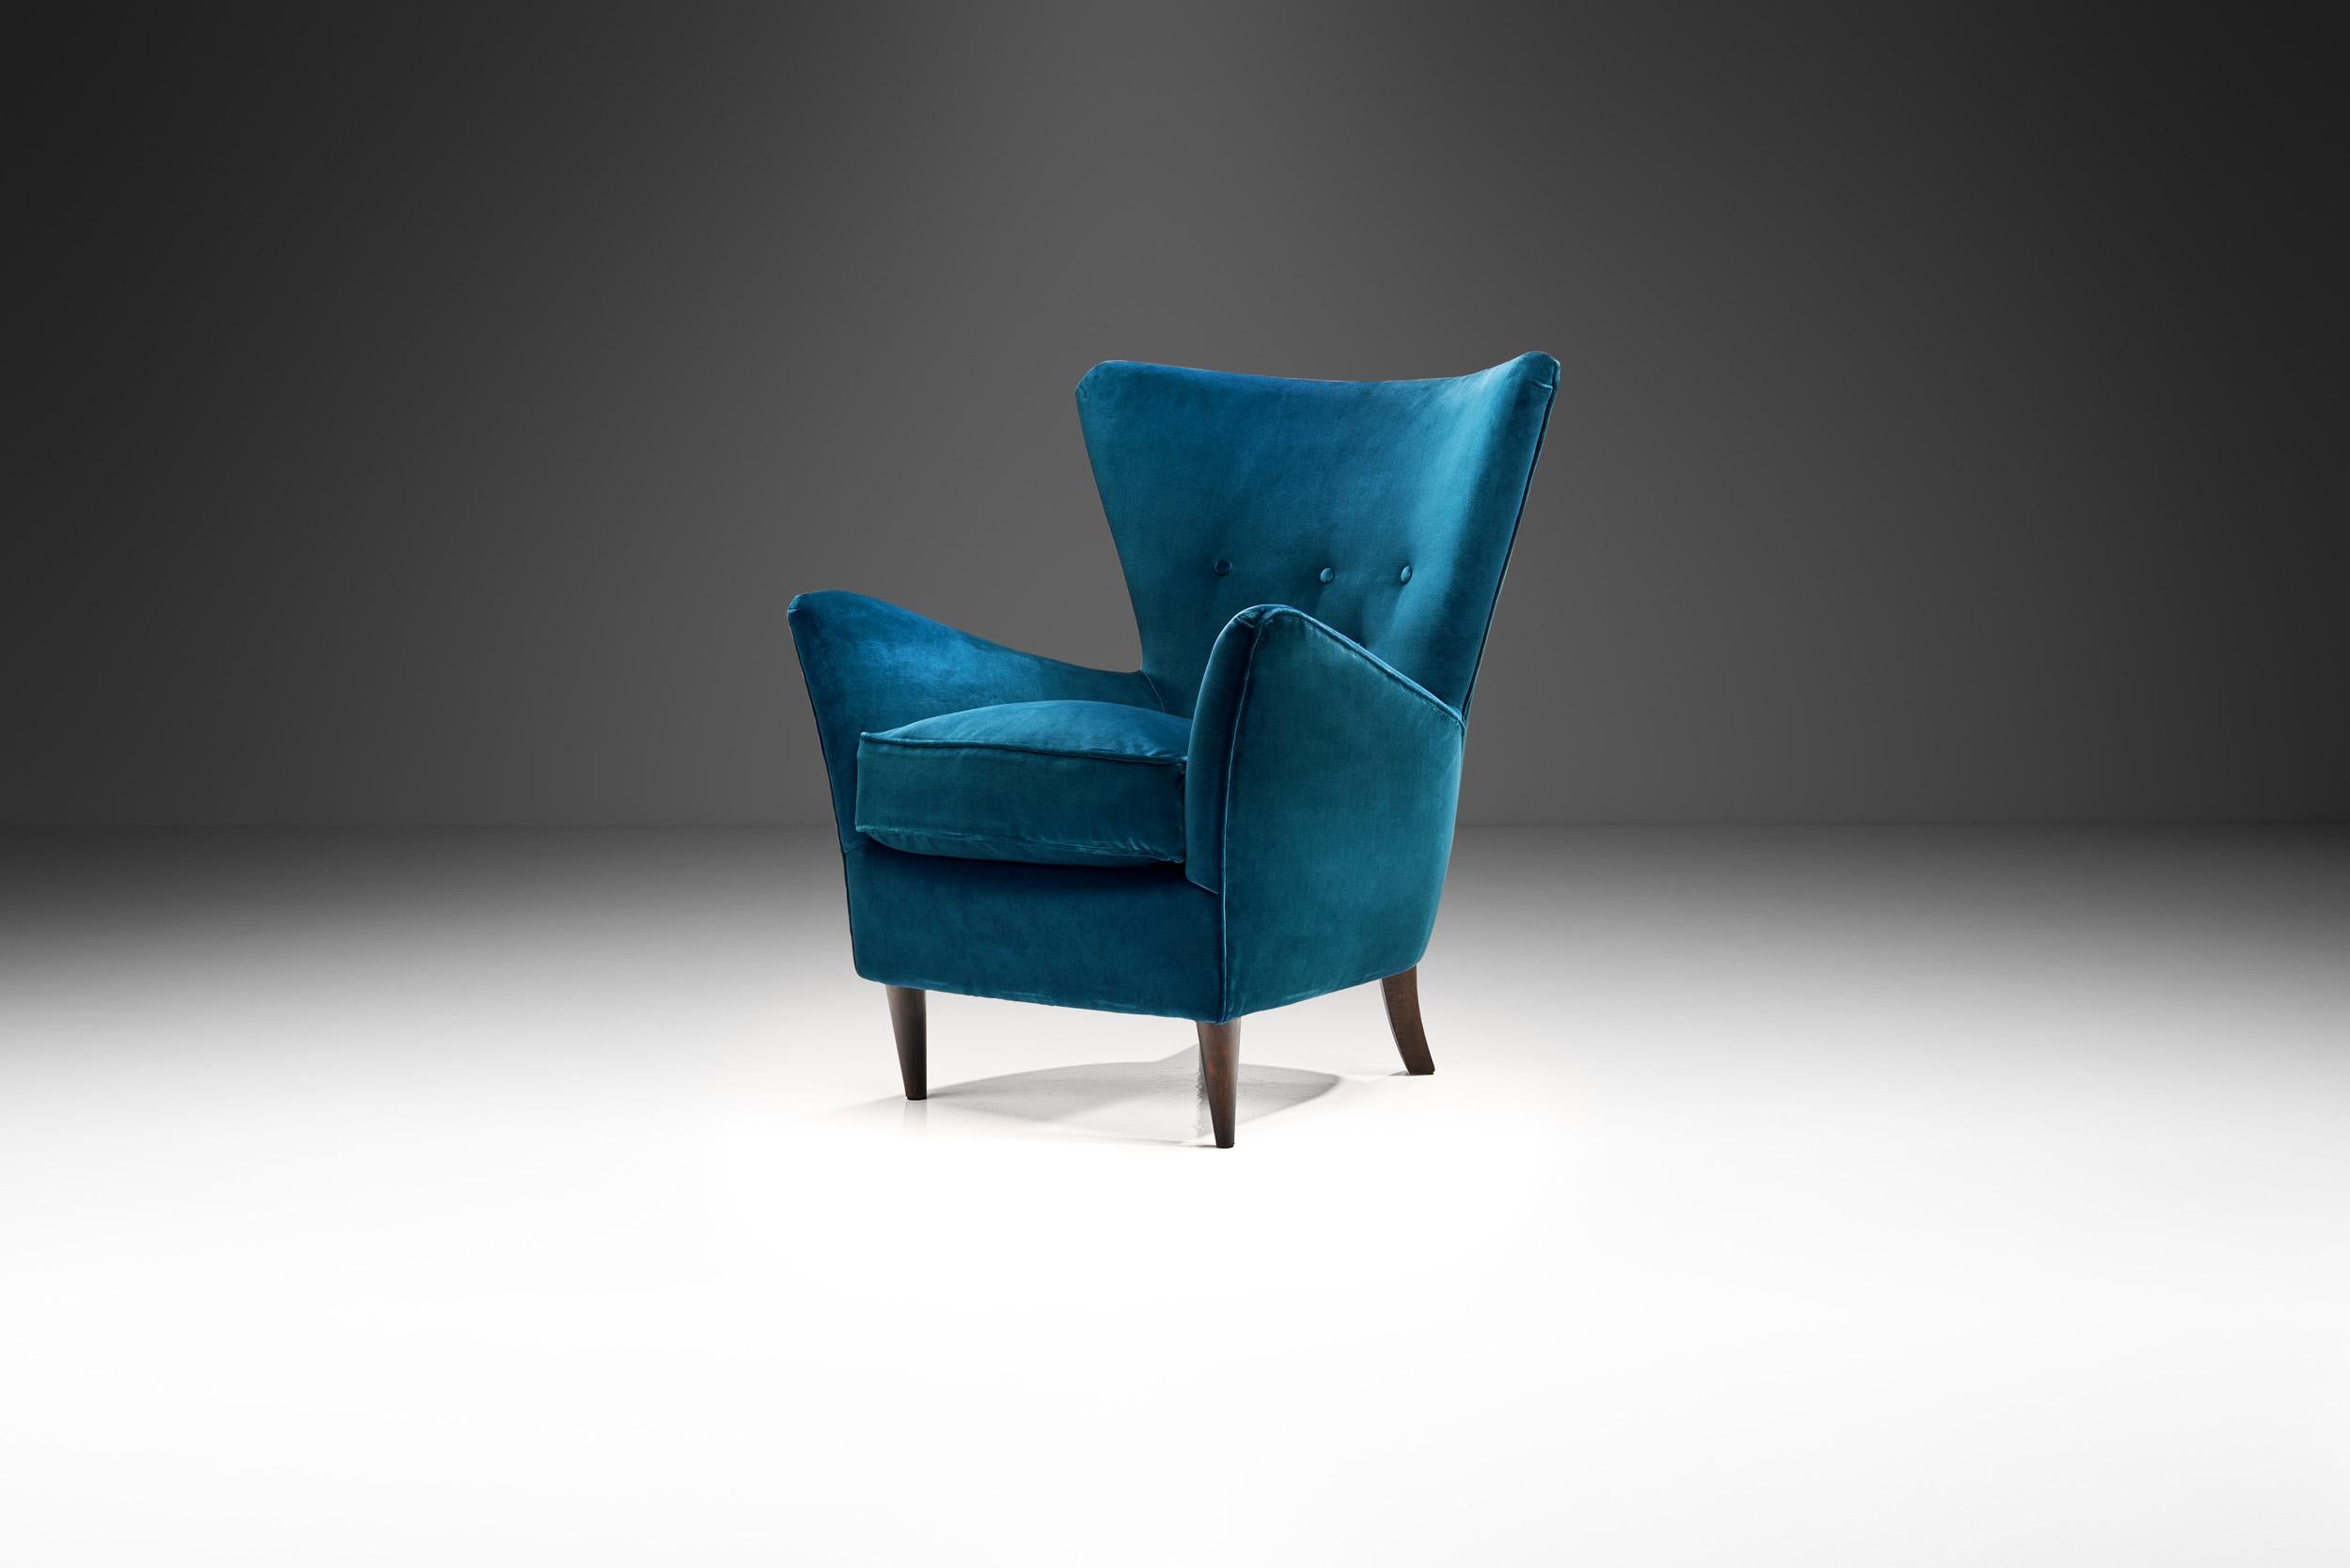 This striking armchair showcases how and why Italy excelled in the coveted mid-century modern style. In this armchair, style meets functionality and quality.

Like many of the Italian armchairs of the 1950s, this chair radiates elegance and quality.